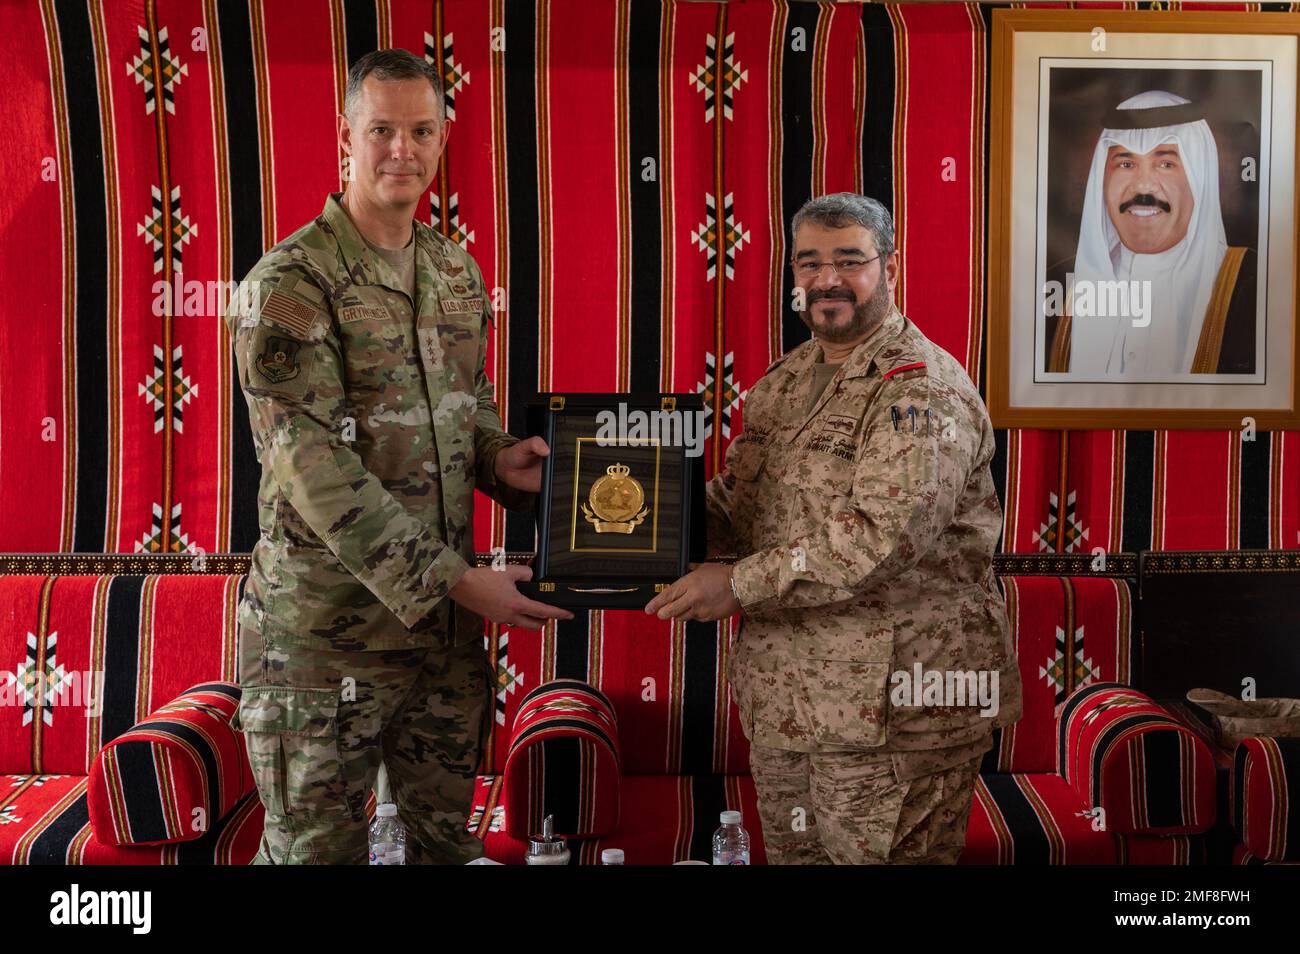 U.S. Air Force Lt. Gen. Alexus G. Grynkewich, left, Ninth Air Force (Air Forces Central) commander, receives a gift from Brig. Gen. Adel Al-Hafez, right, Kuwait Air Defense command chief, at the Kuwait Air Defense Headquarters, Aug. 17, 2022. During the visit, Grynkewich met with Kuwaiti military leaders to discuss the importance of resolute partnerships within the U.S. Central Command area of responsibility. Stock Photo